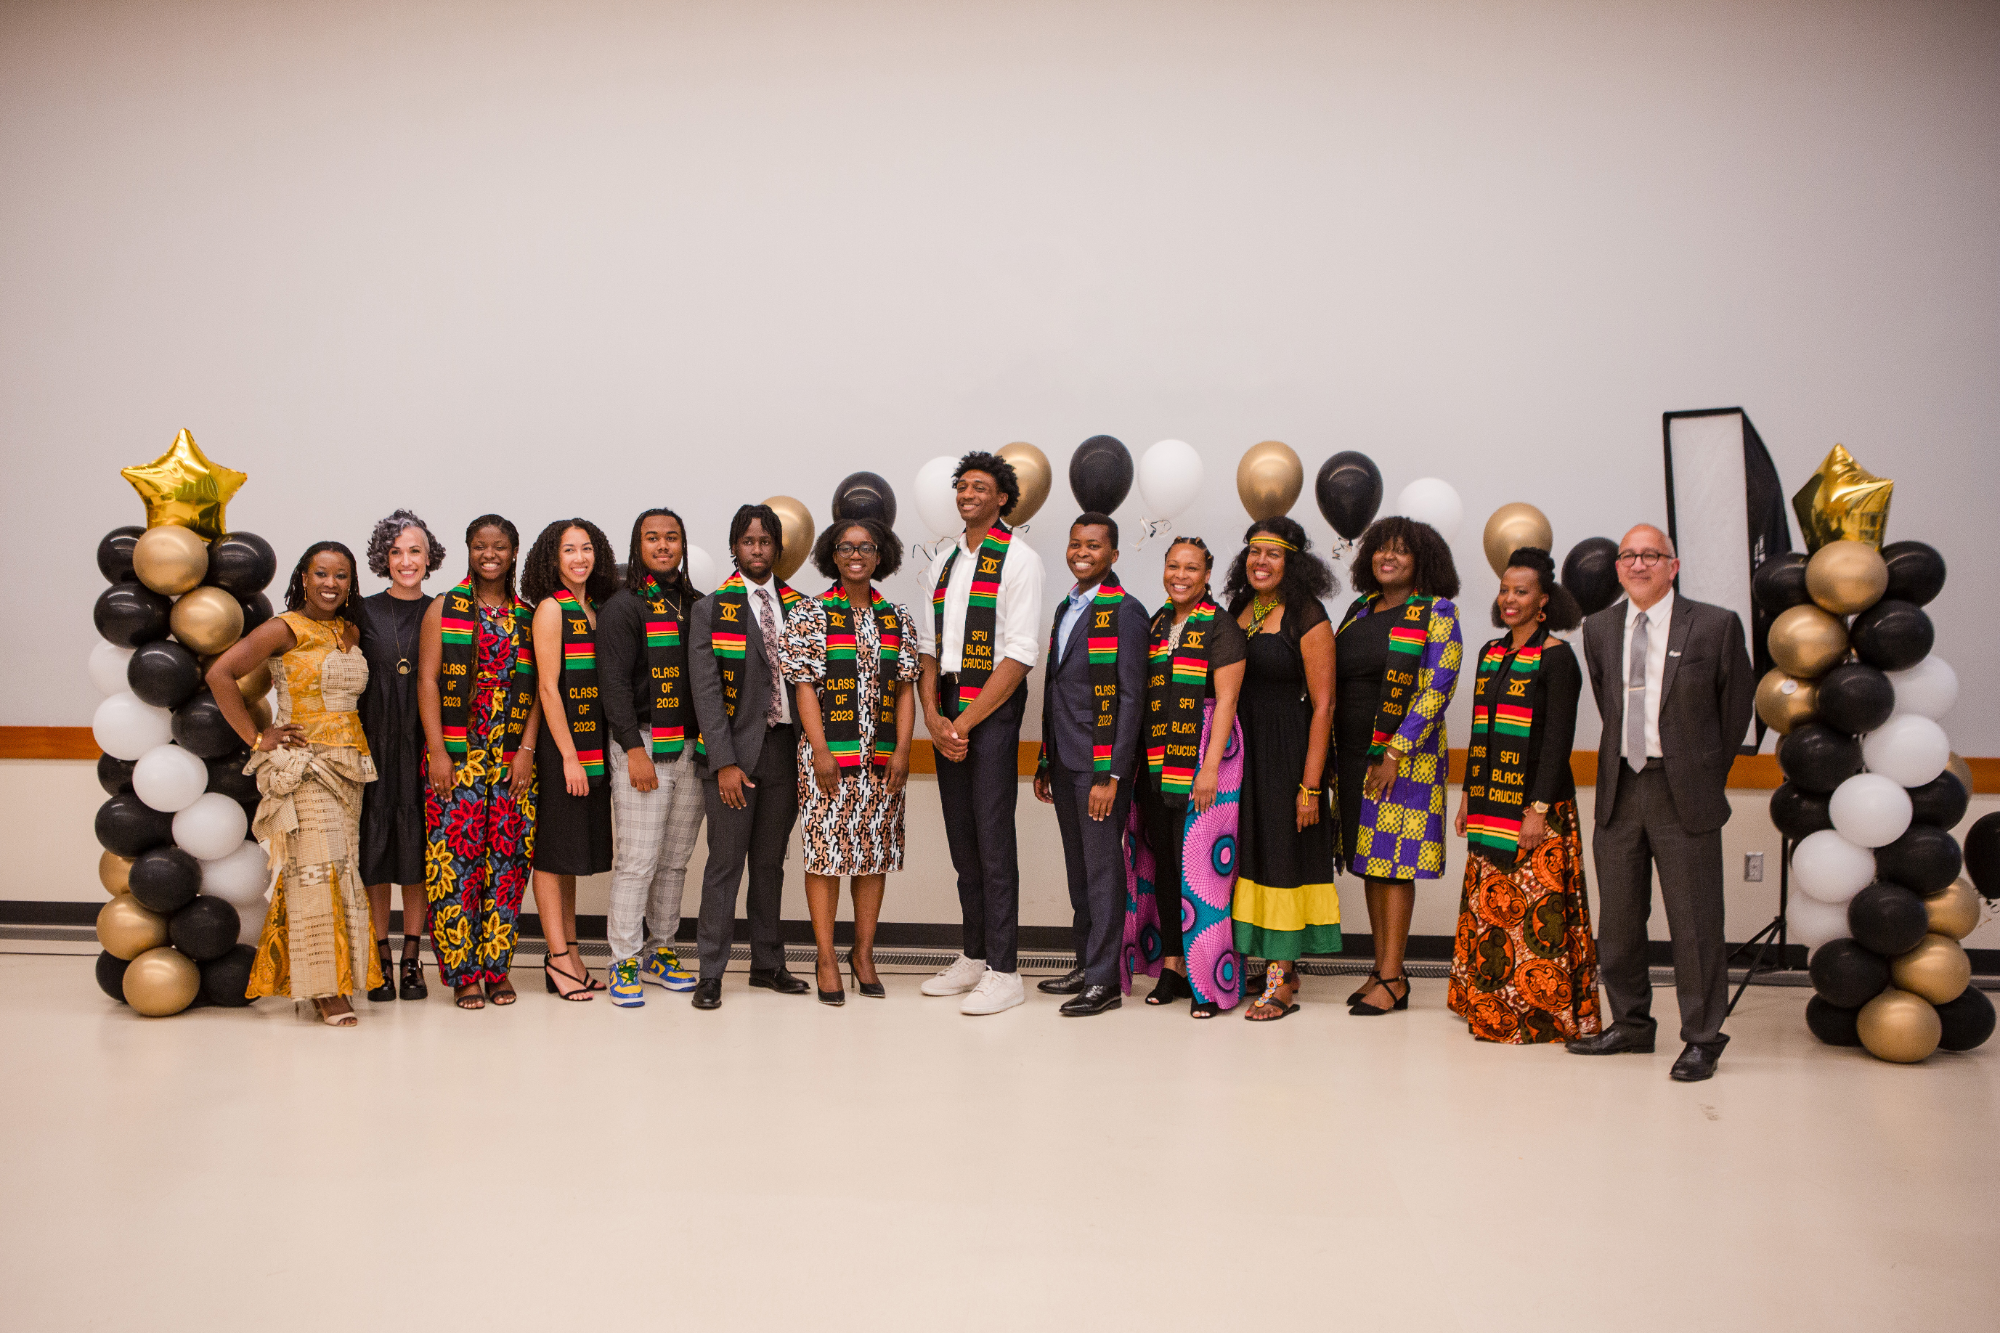 Black History Month 2024 - Equity, Diversity and Inclusion - Simon Fraser  University